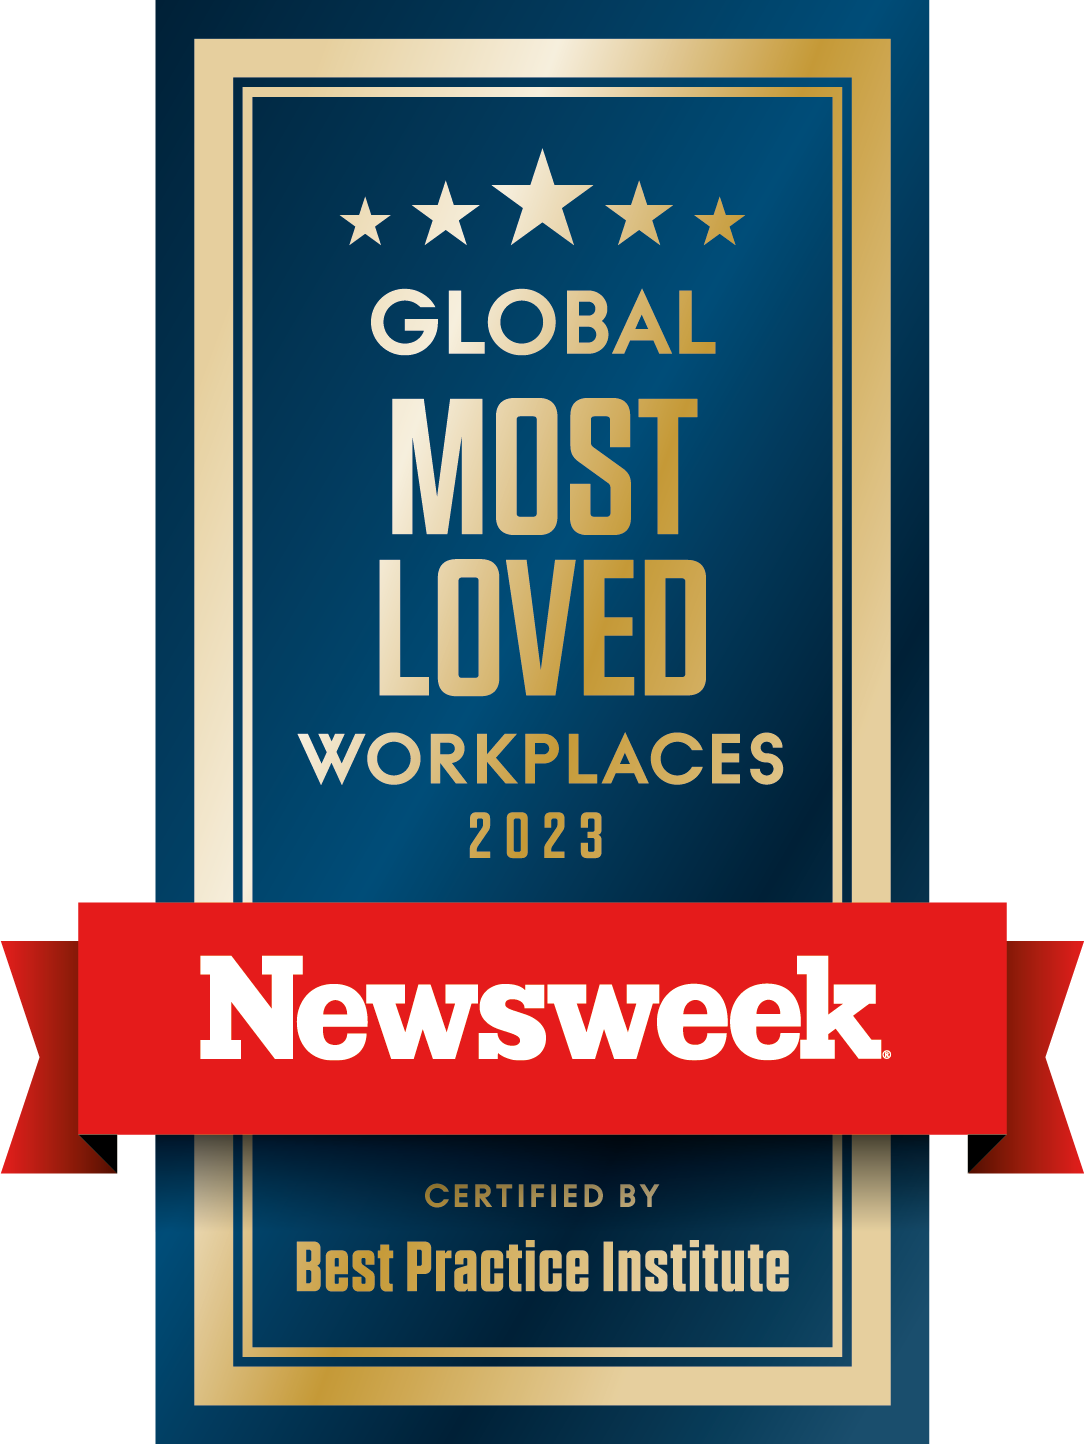 Ansys named to Newsweek’s Global Most Loved Workplaces List for 2023